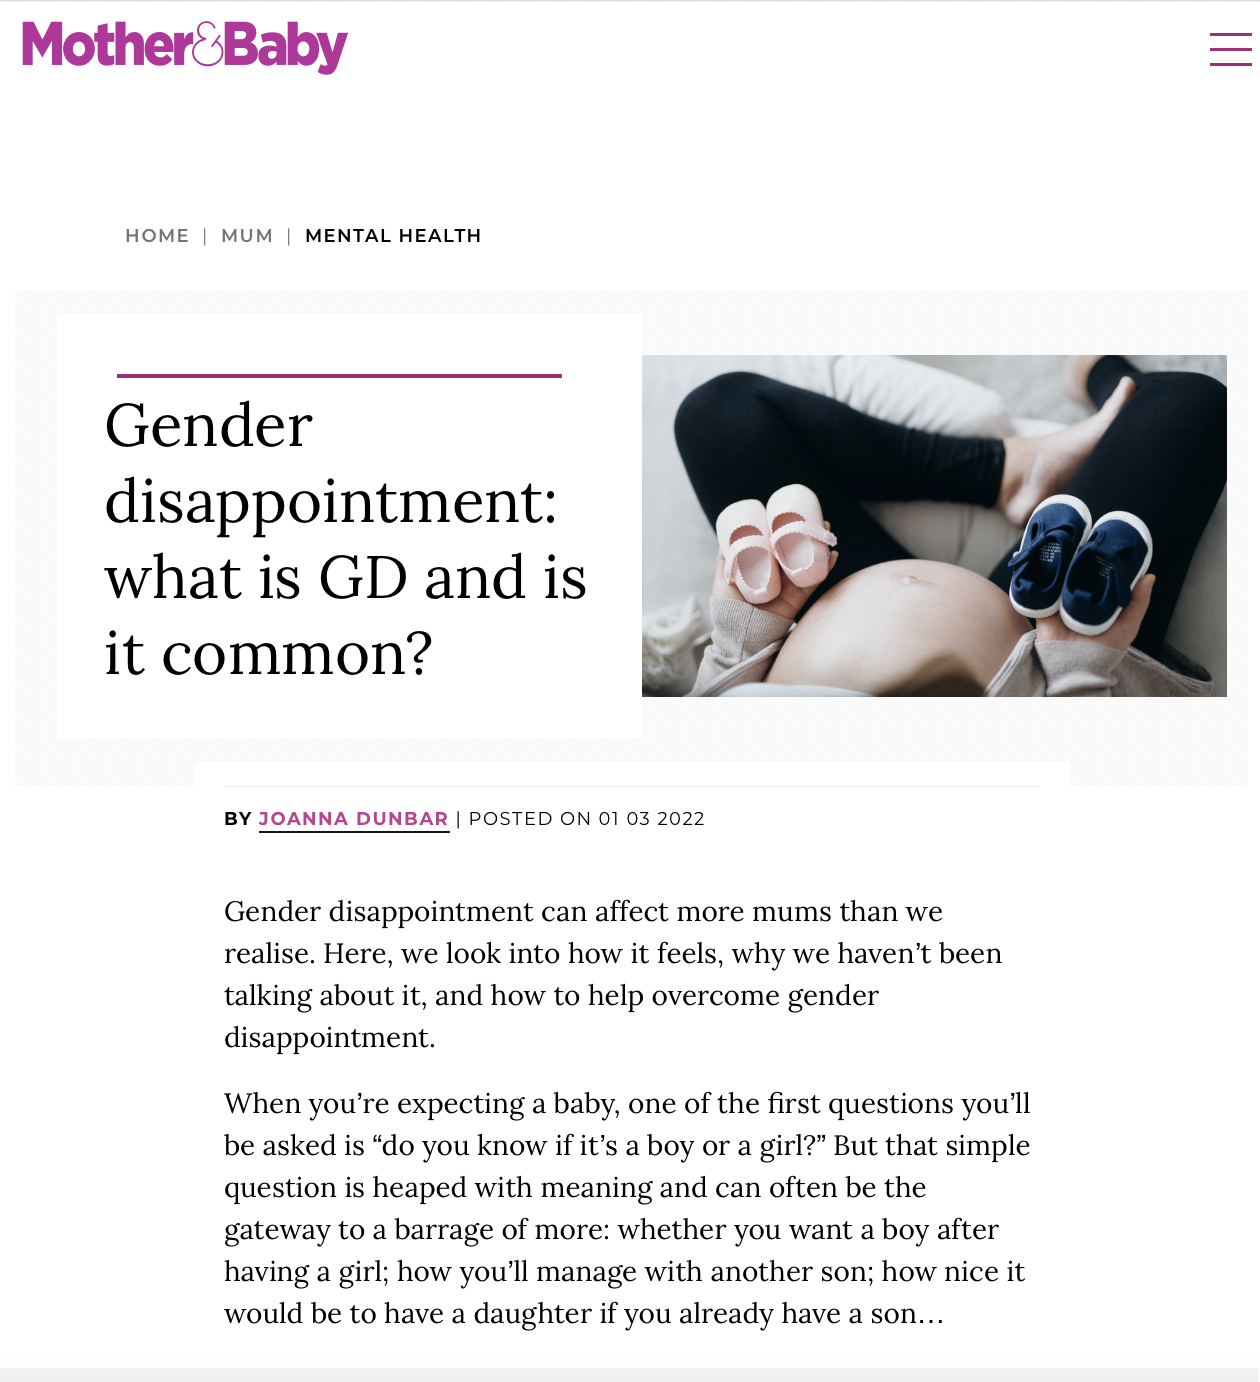 Gender disappointment: what is GD and is it common?